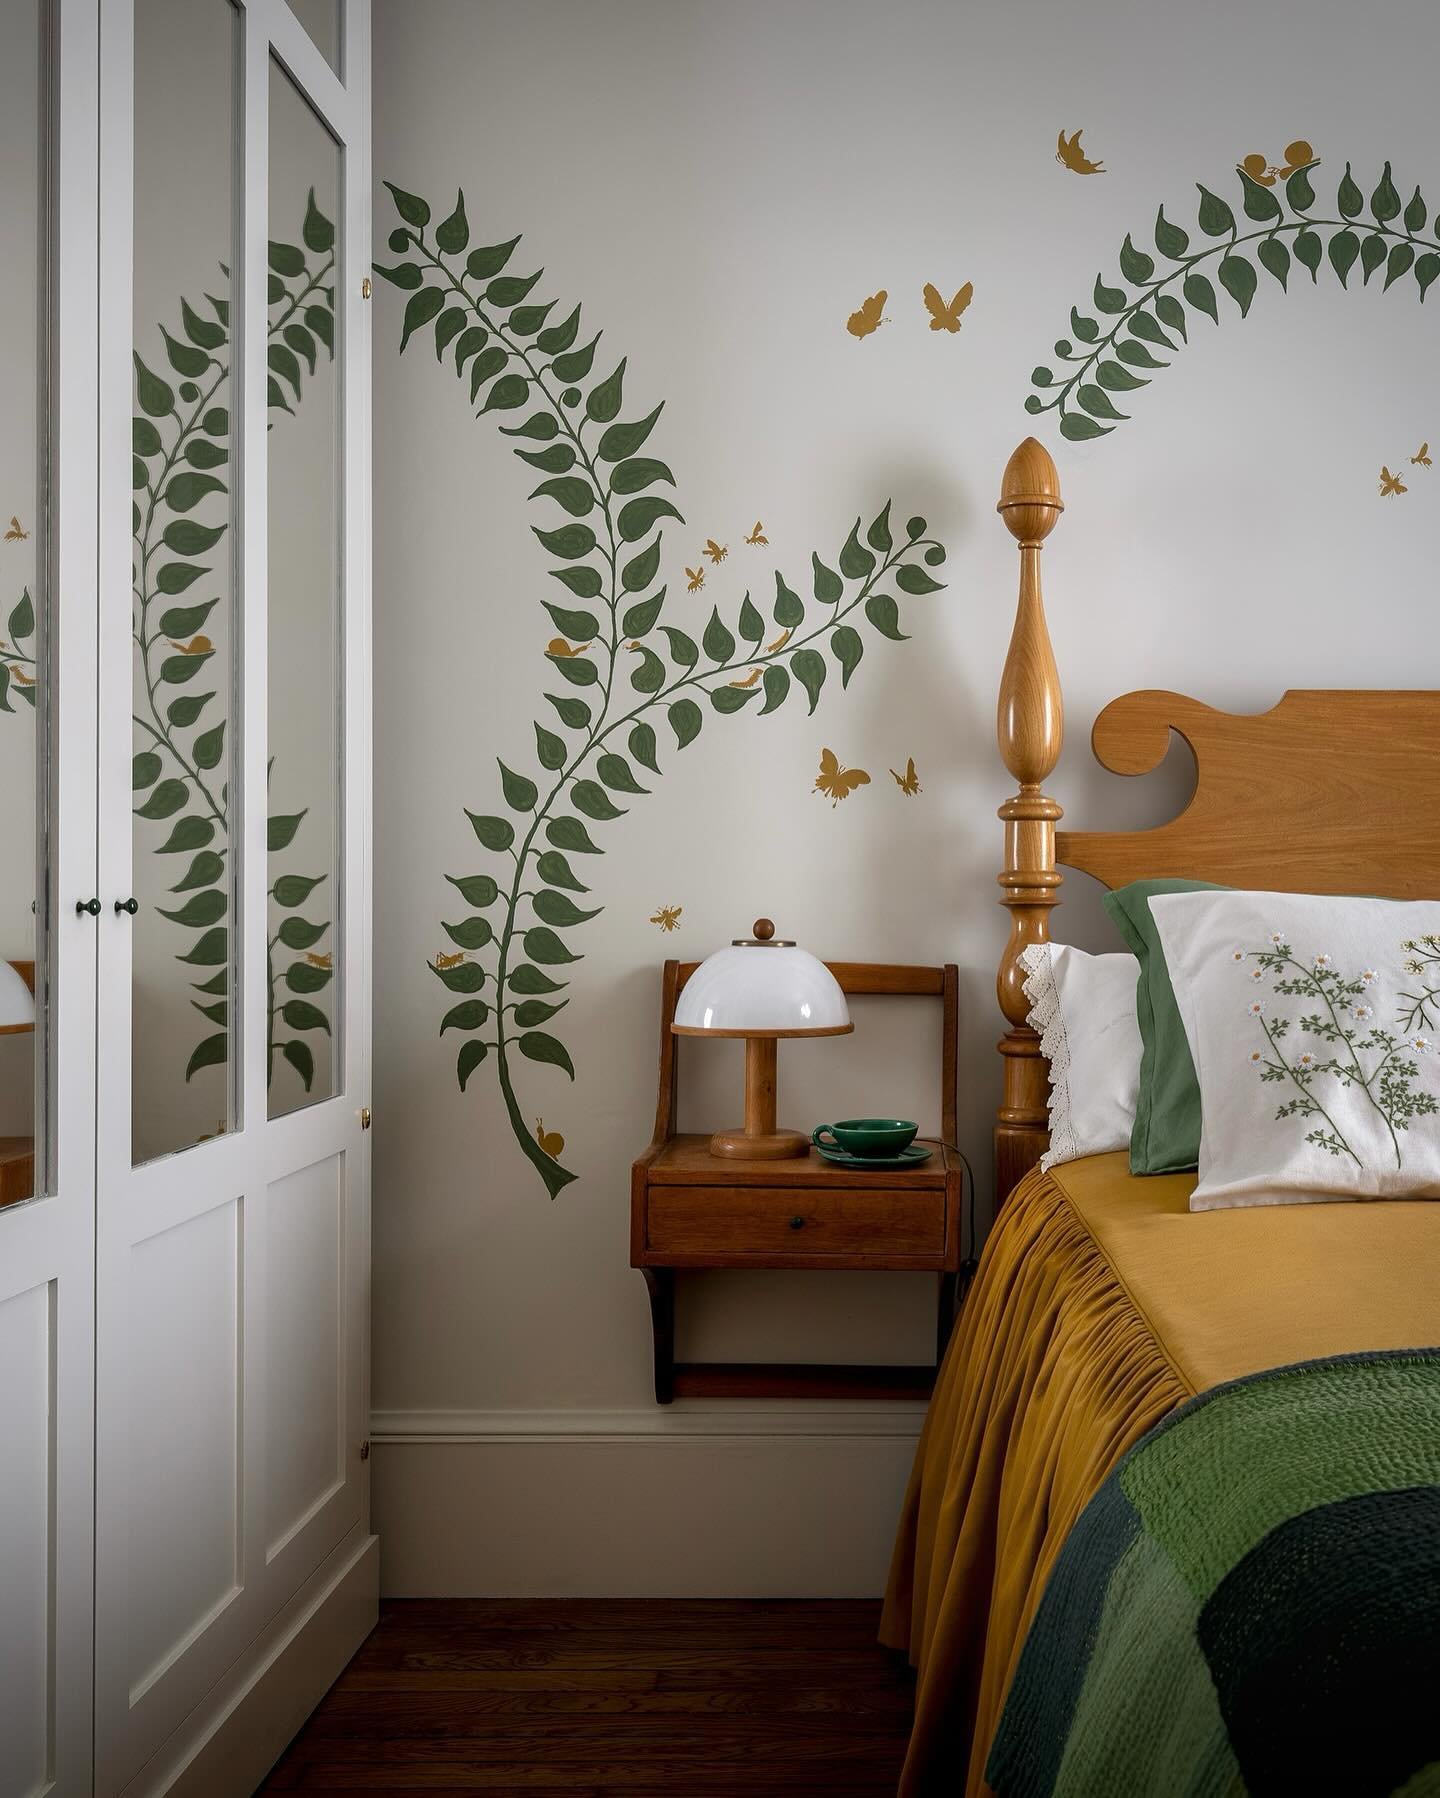 I painted plants and lots of little 🐞🐛🦋🐌 friends on the walls of our bedroom in the Rue d&rsquo;Alesia apartment.  They bring the garden in, are fun to look at, and were even more fun to paint!
.
The walls are @farrowandball Schoolhouse White whi